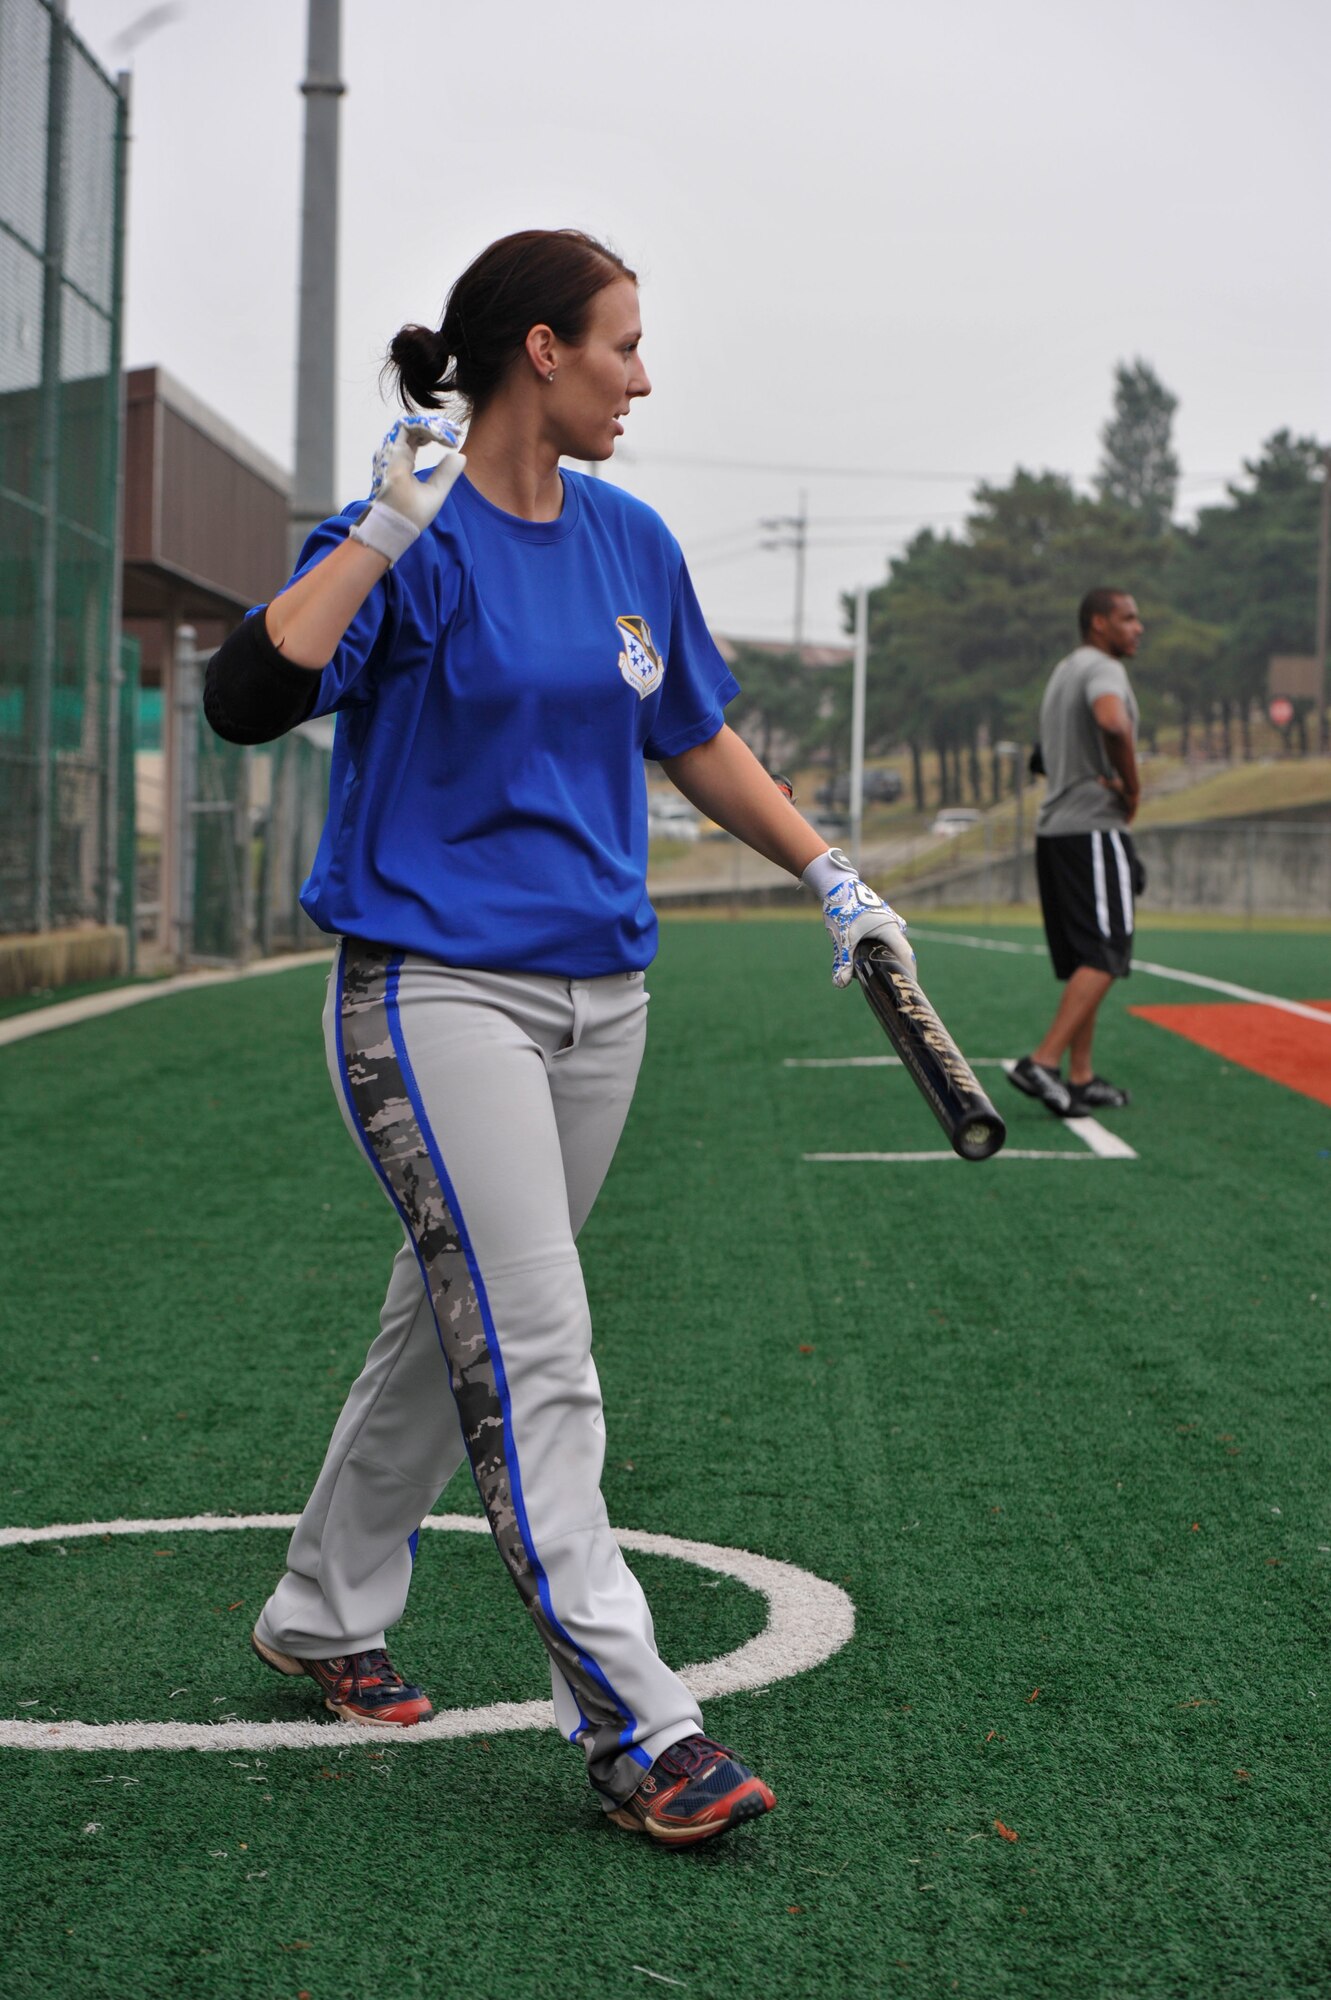 Senior Airman Amber Devlin, 694th Intelligence, Surveillance and Reconnaissance Group program manager, walks to the plate during the fourth inning of a softball game against the 3rd Battlefield Coordination Detachment Sept. 29, 2014, on Osan Air Base, Republic of Korea. Devlin was selected to be a part of the 15-player roster on the Air Force’s Women’s softball team. (U.S. Air Force photo by Senior Airman David Owsianka)